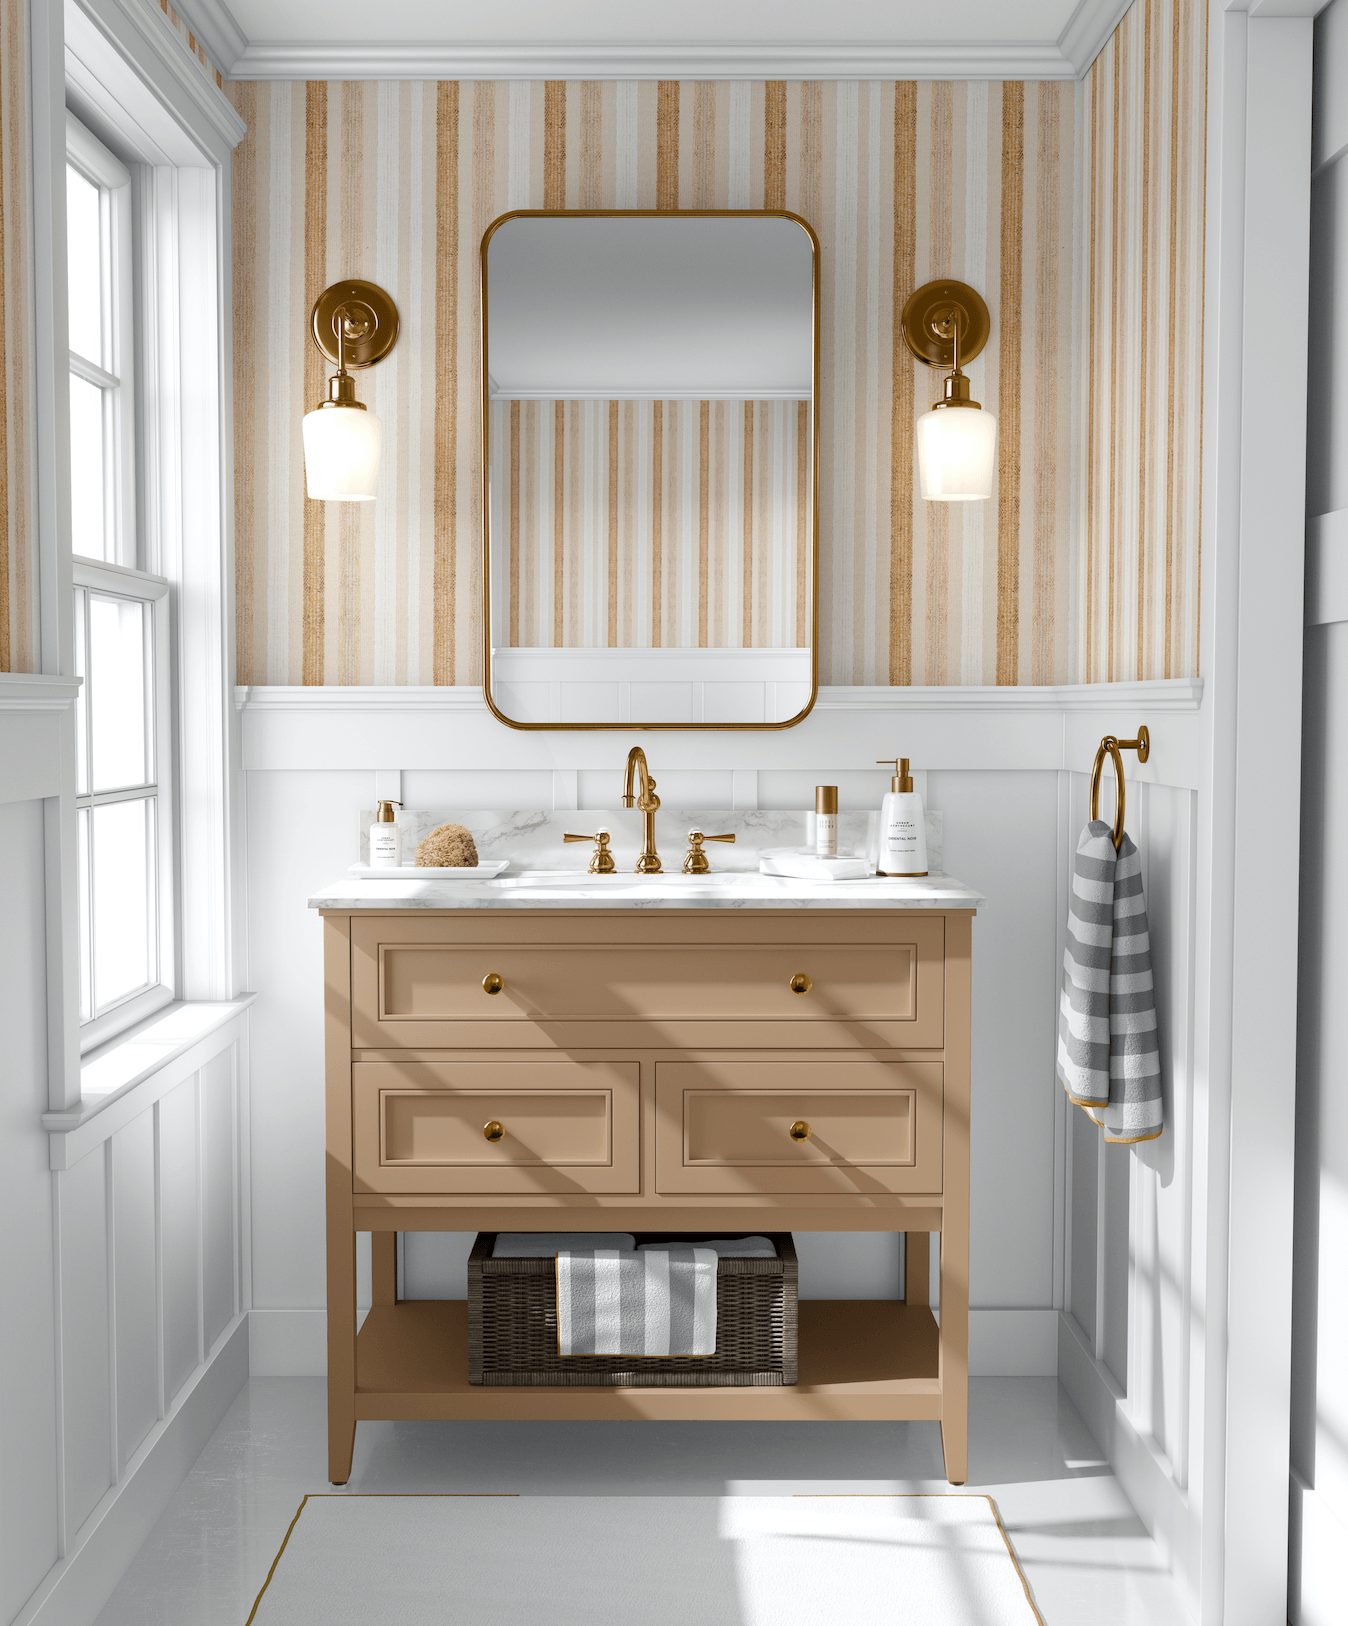 english striped wall paper in bathroom with brown vanity and gold mirror